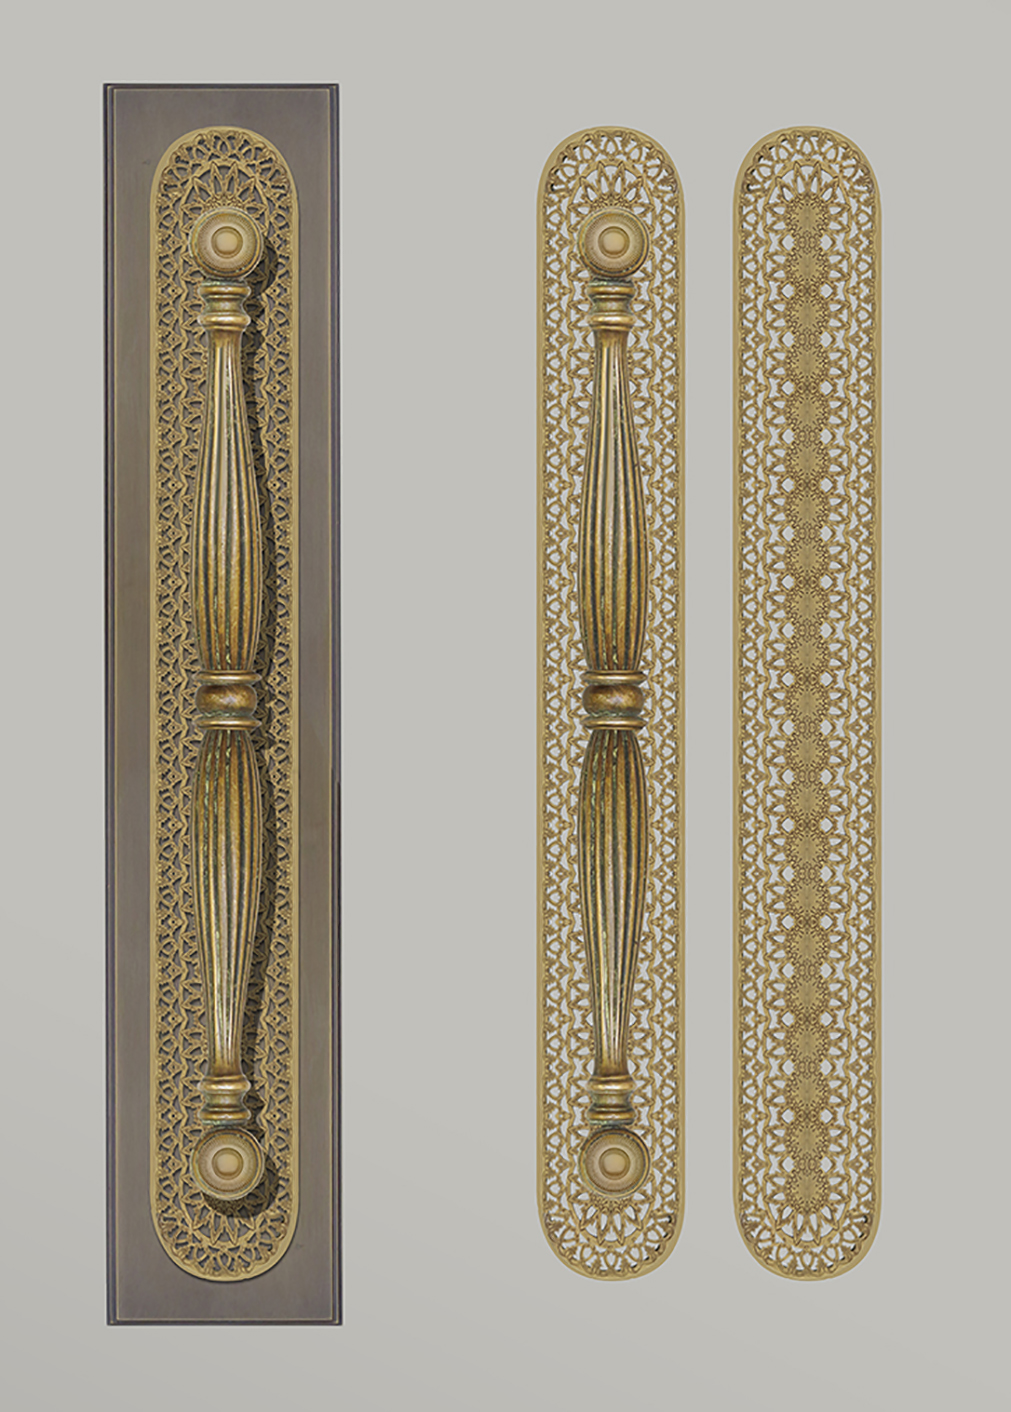 Bespoke door pull inspired by vintage mechanisms and fittings in antique brass finish.